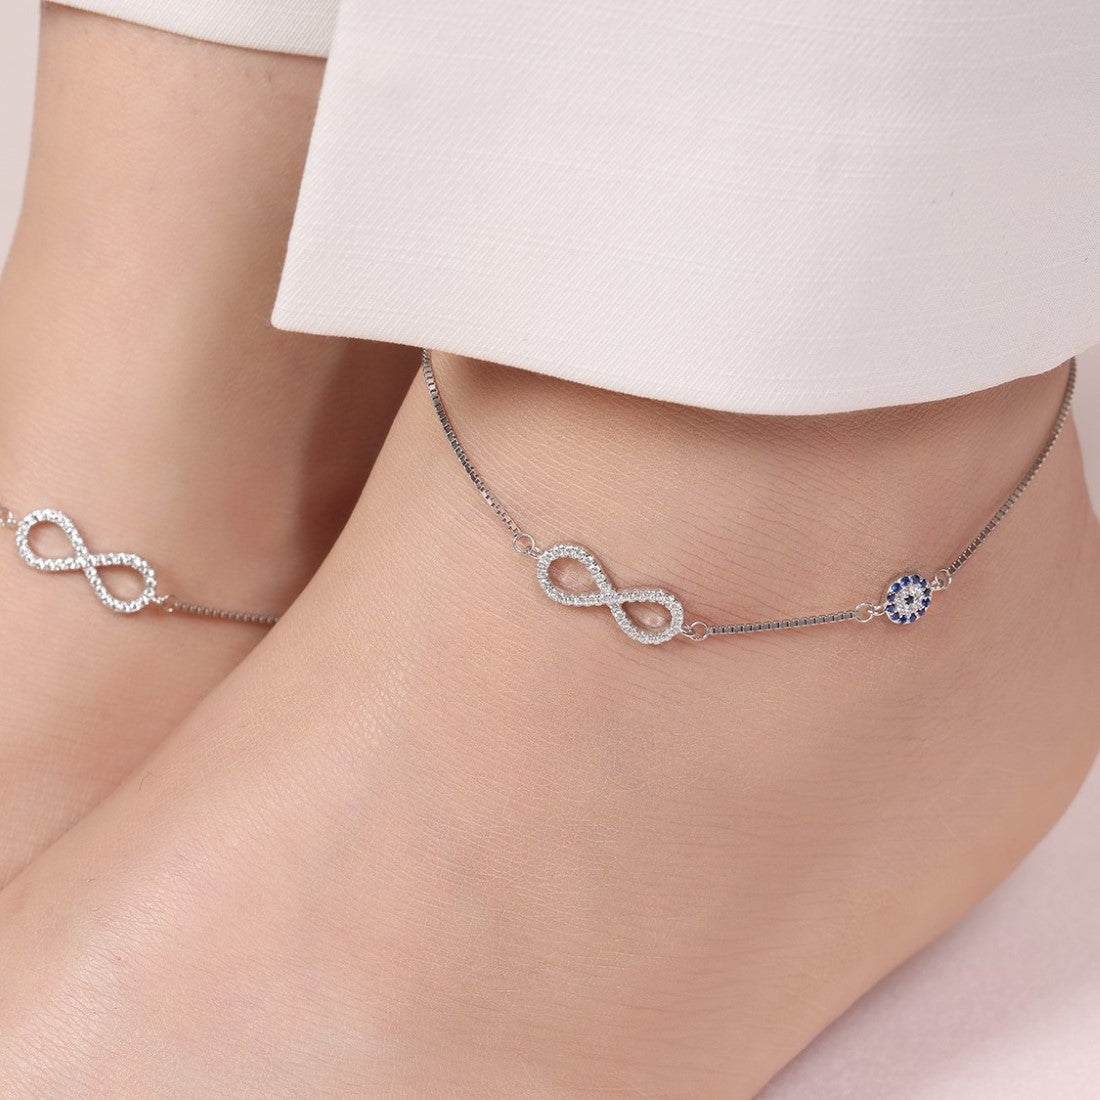 Evil Eye Guardian Rhodium Plated 925 Sterling Silver Anklet